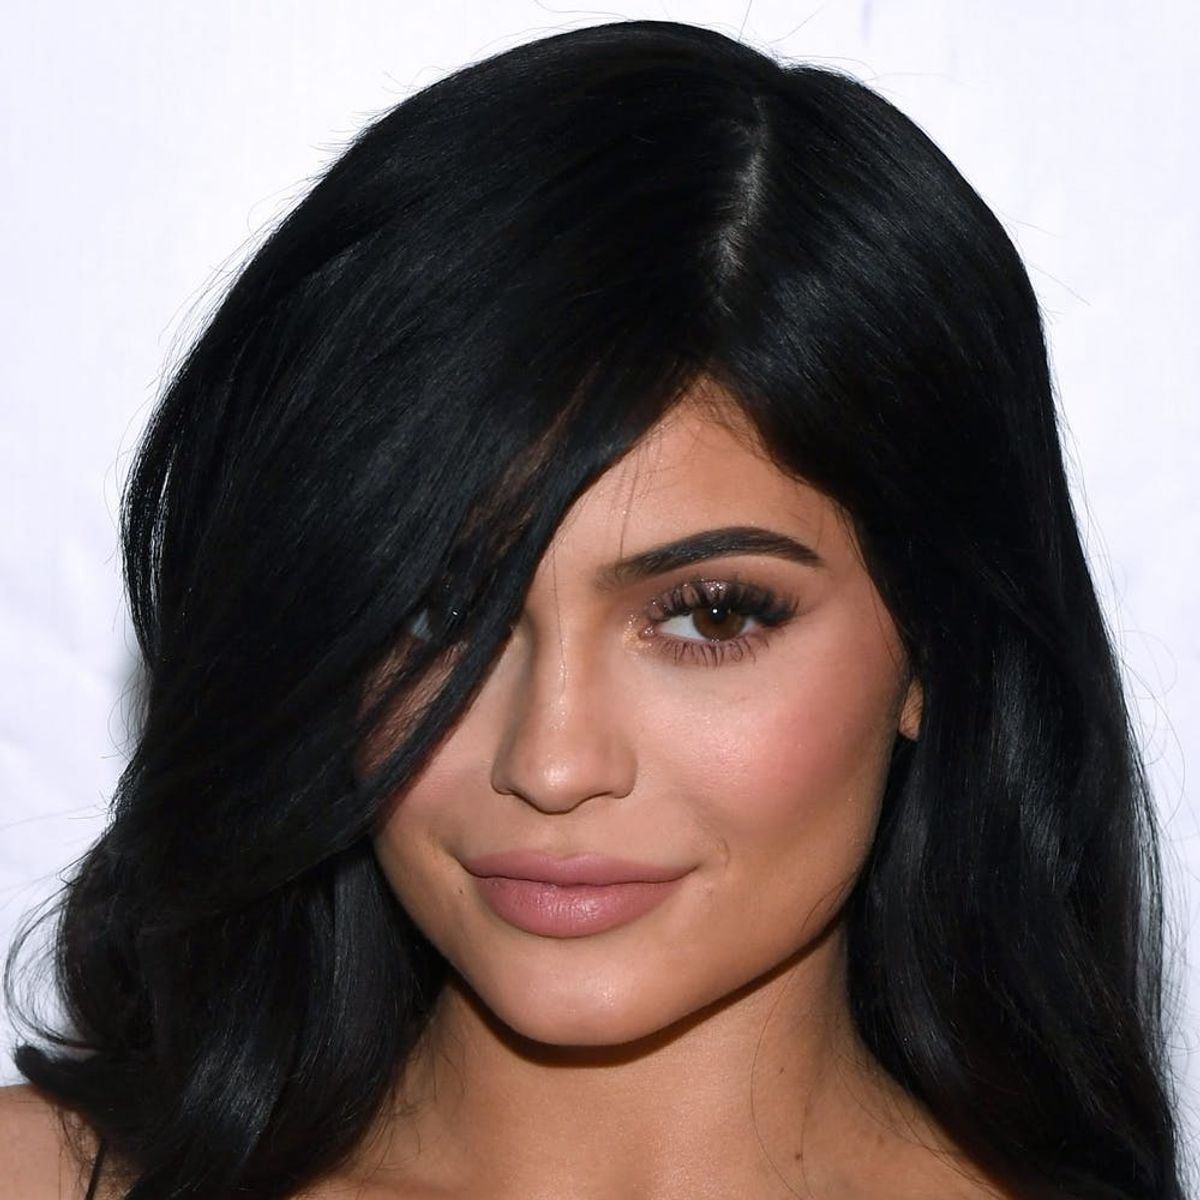 Kylie Jenner’s Festive Thanksgiving Spread Was Seriously Awe-Worthy